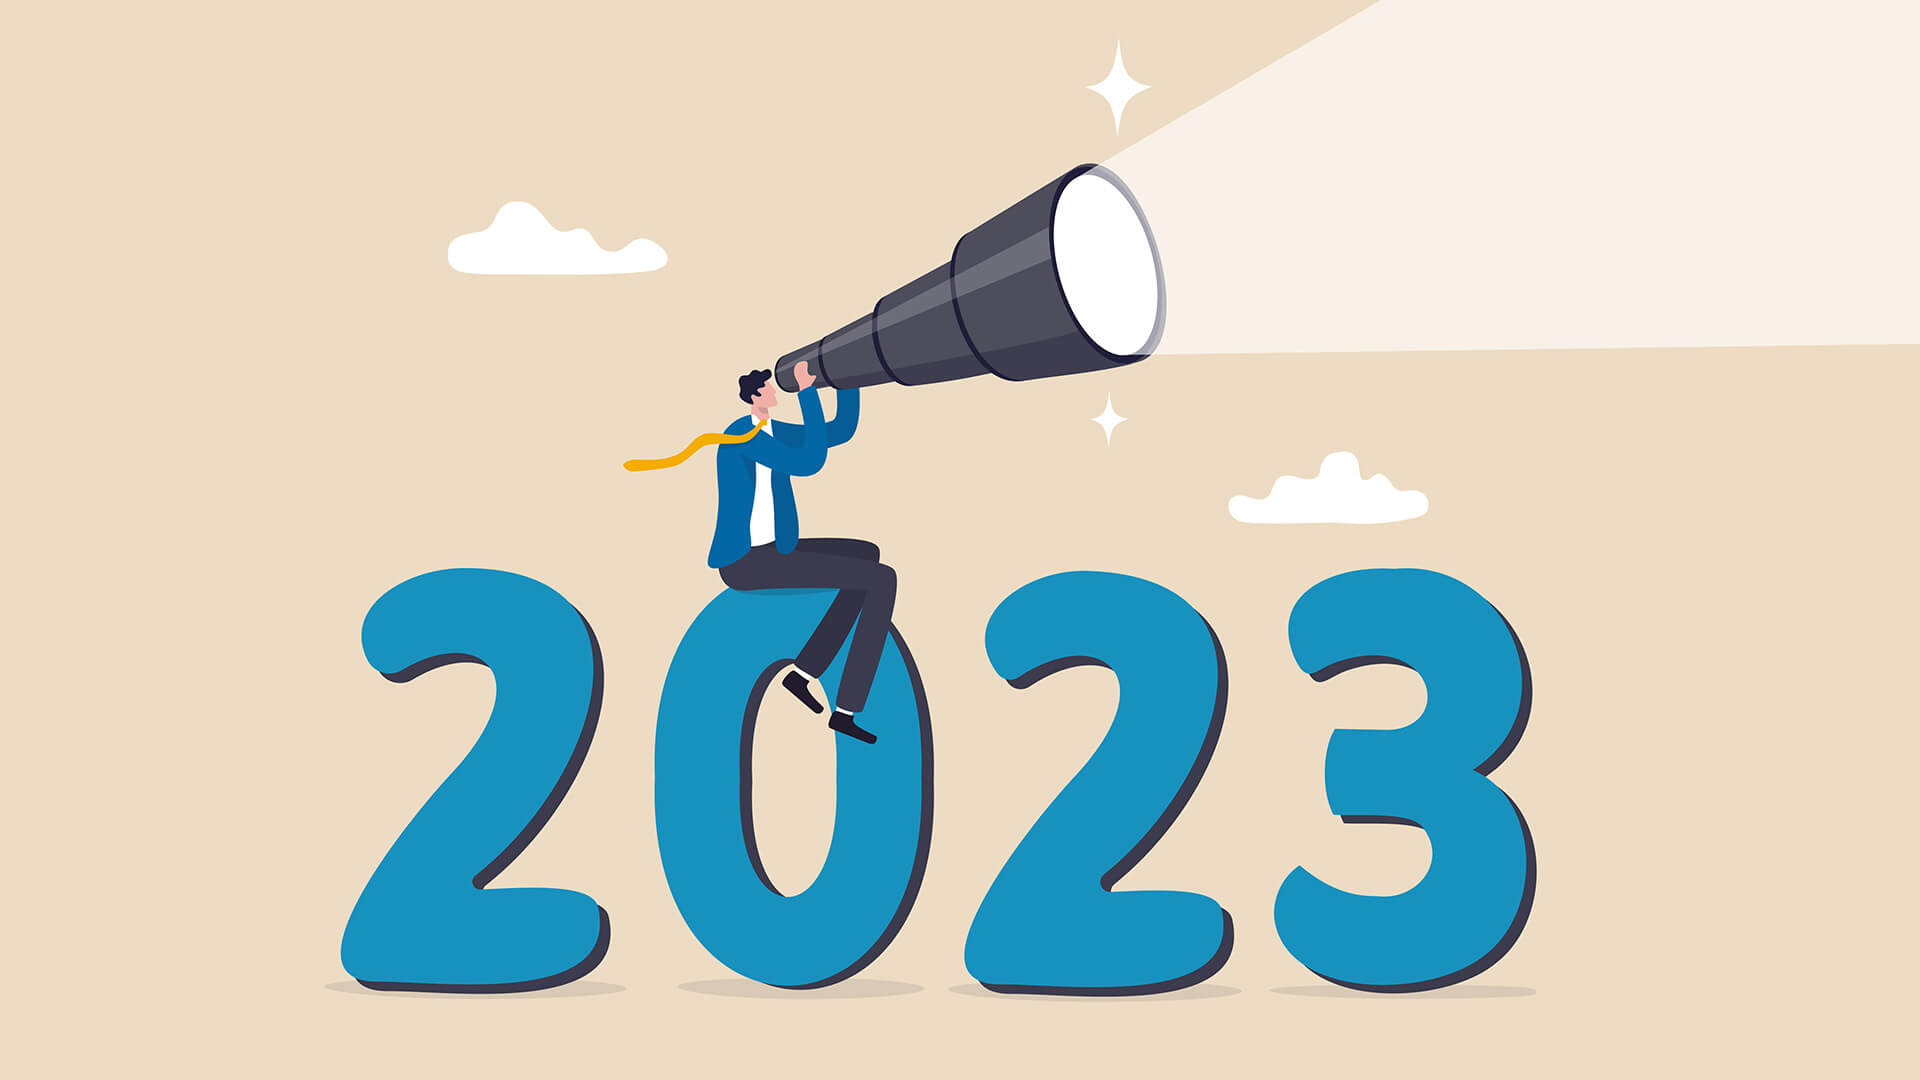 Key Outlooks for Business and Society in 2023